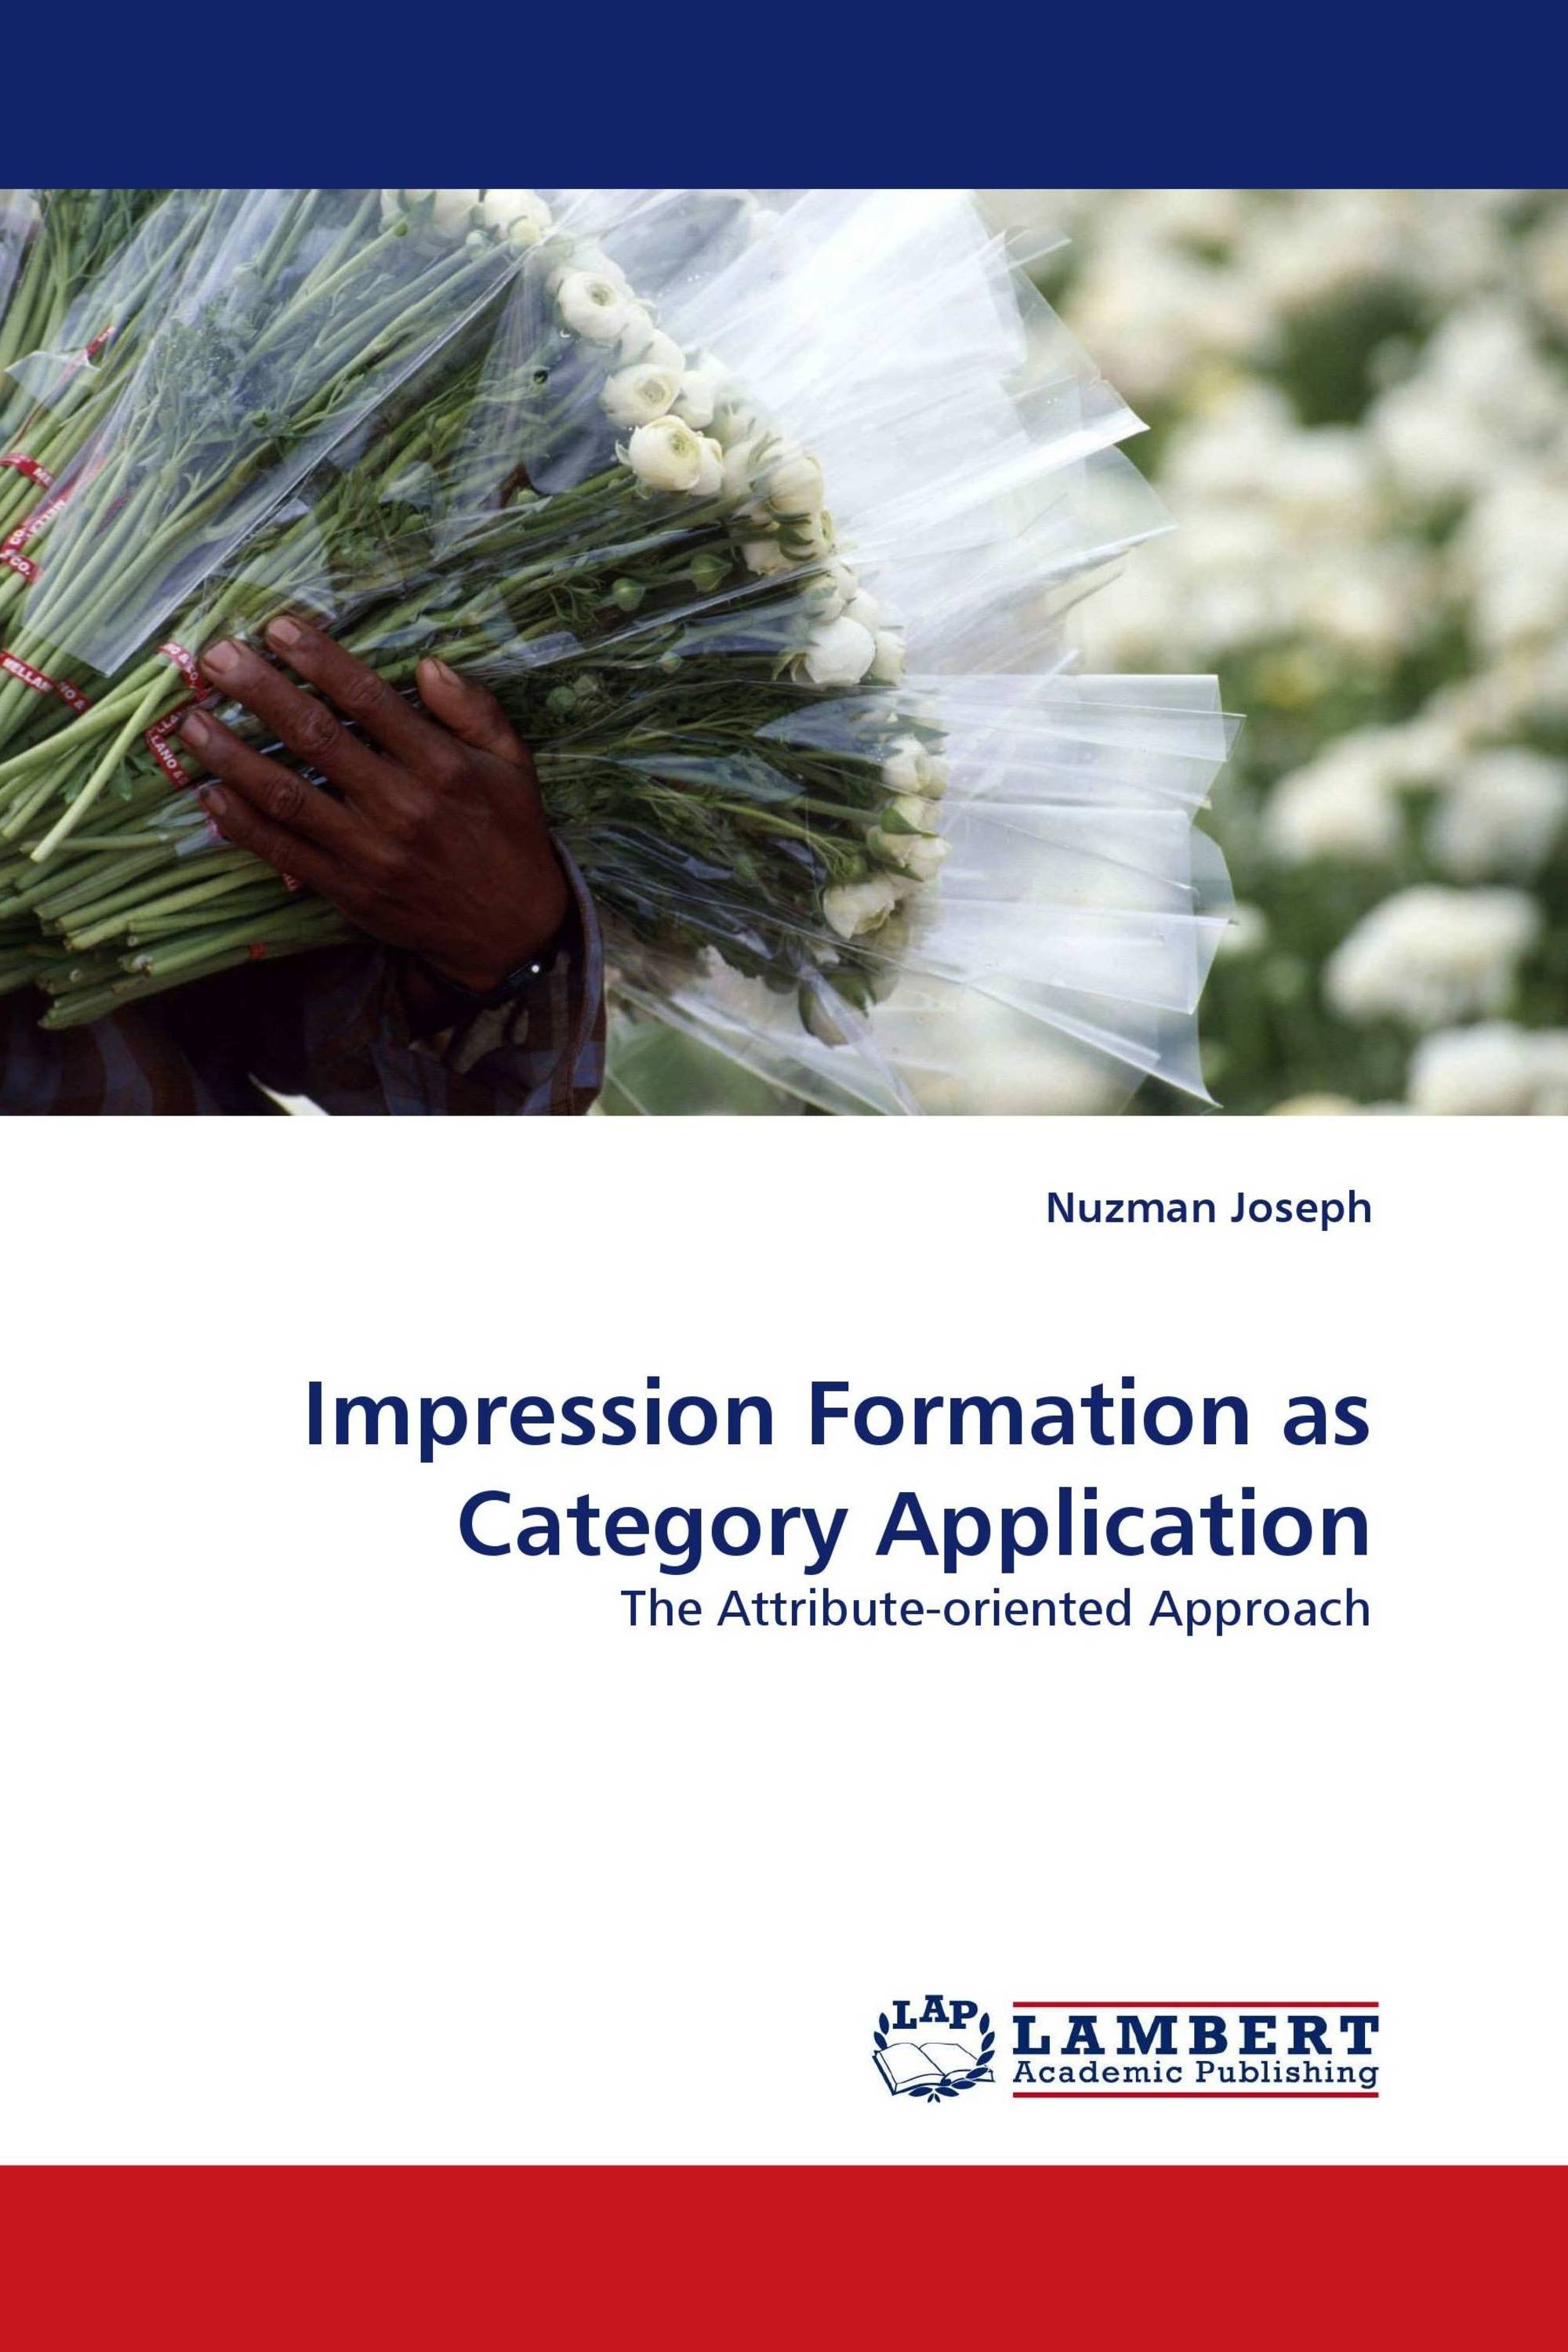 Impression Formation as Category Application